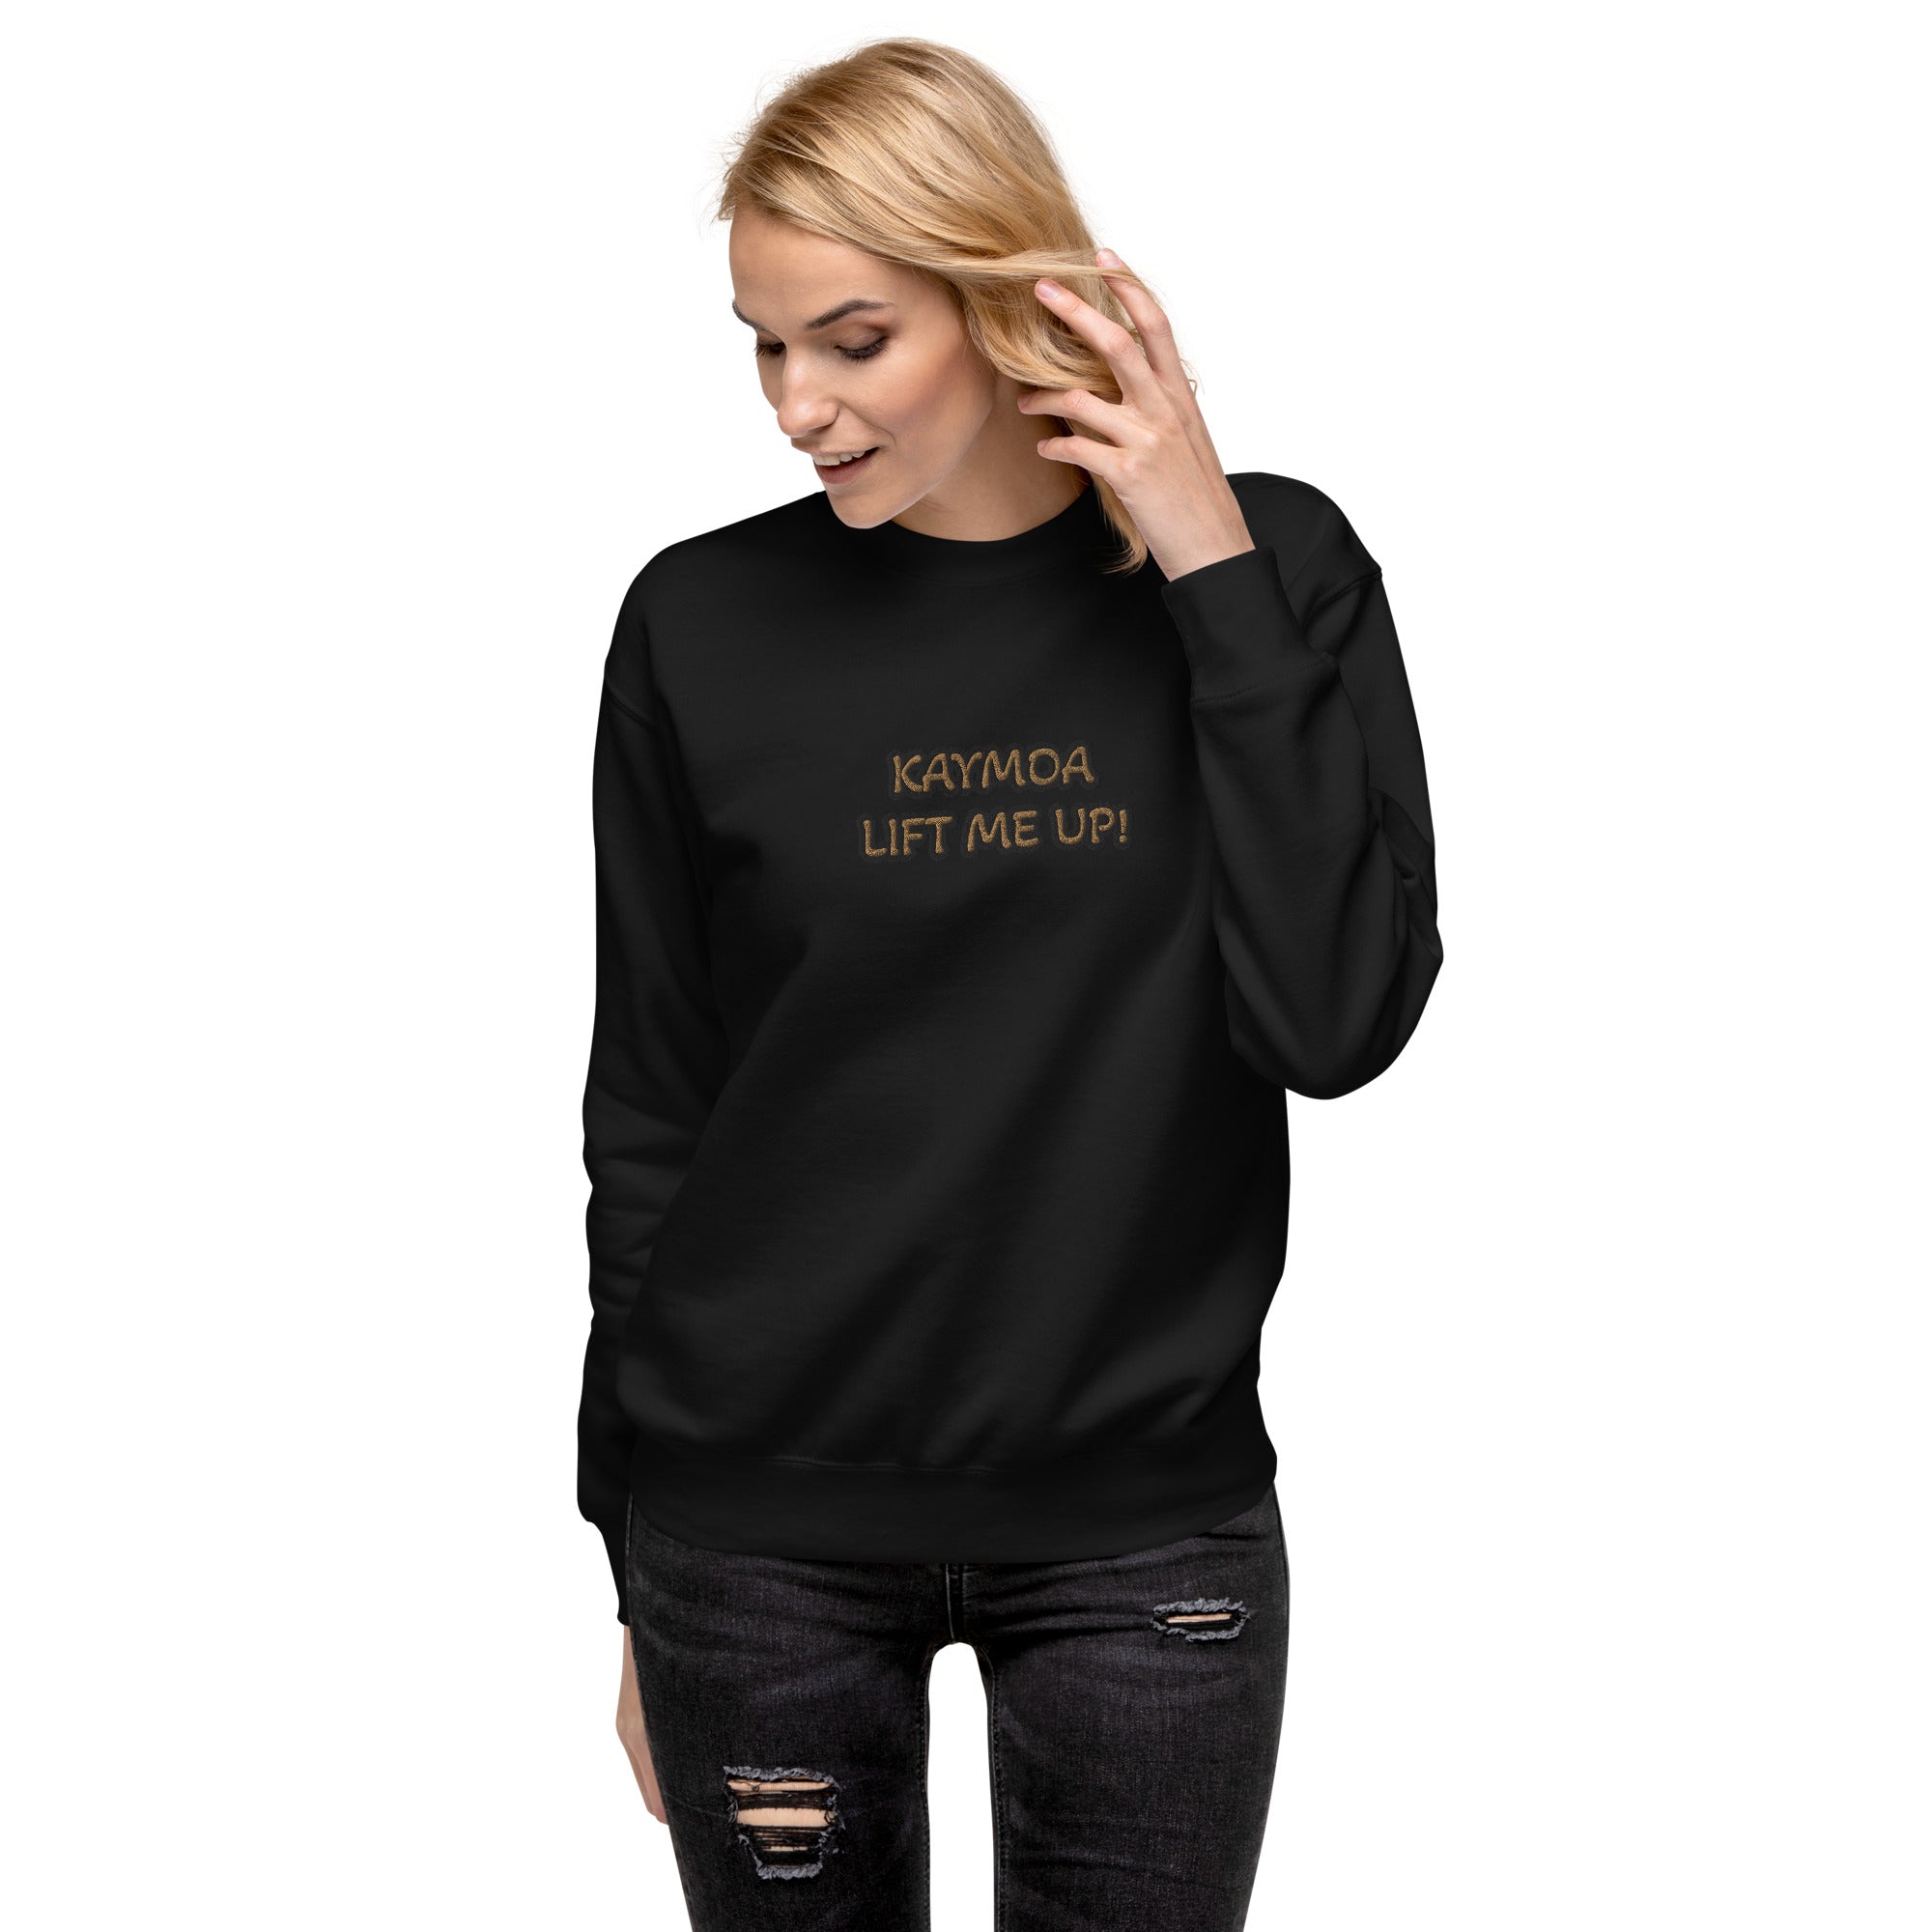 Women's Fitted Sweatshirt Lift Me Up!